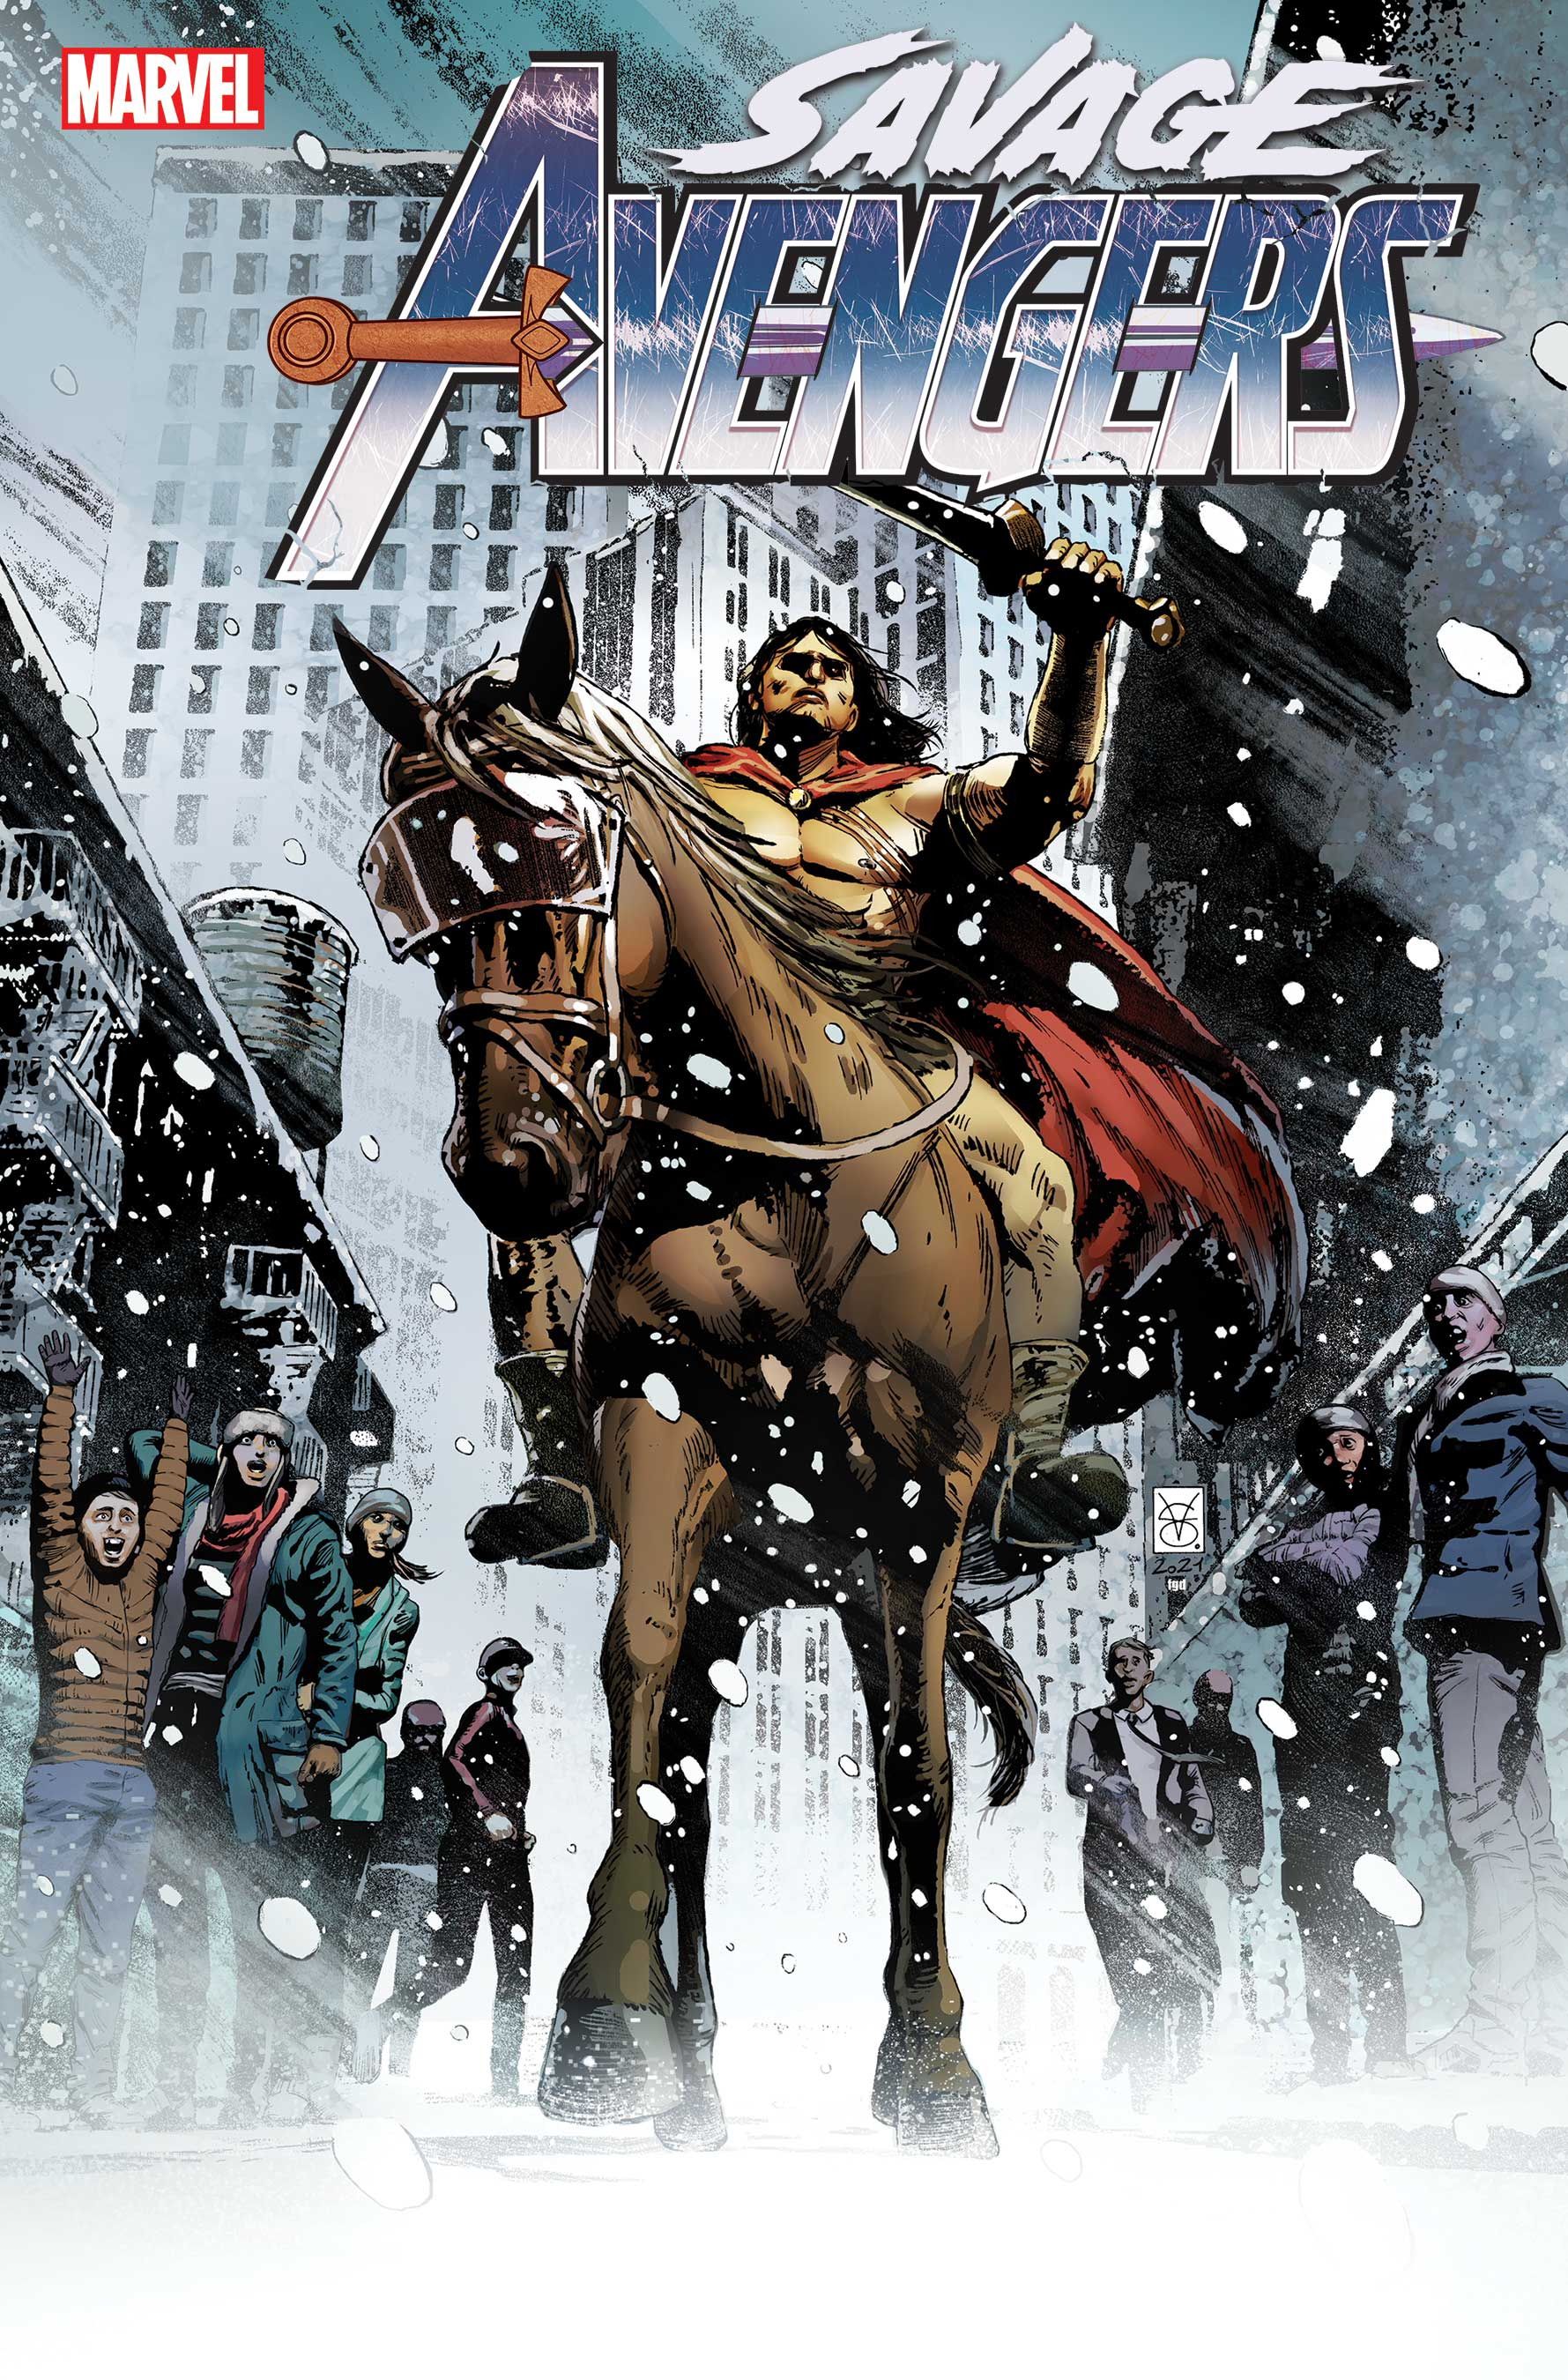 Savage Avengers 28 cover featuring Conan on a horse